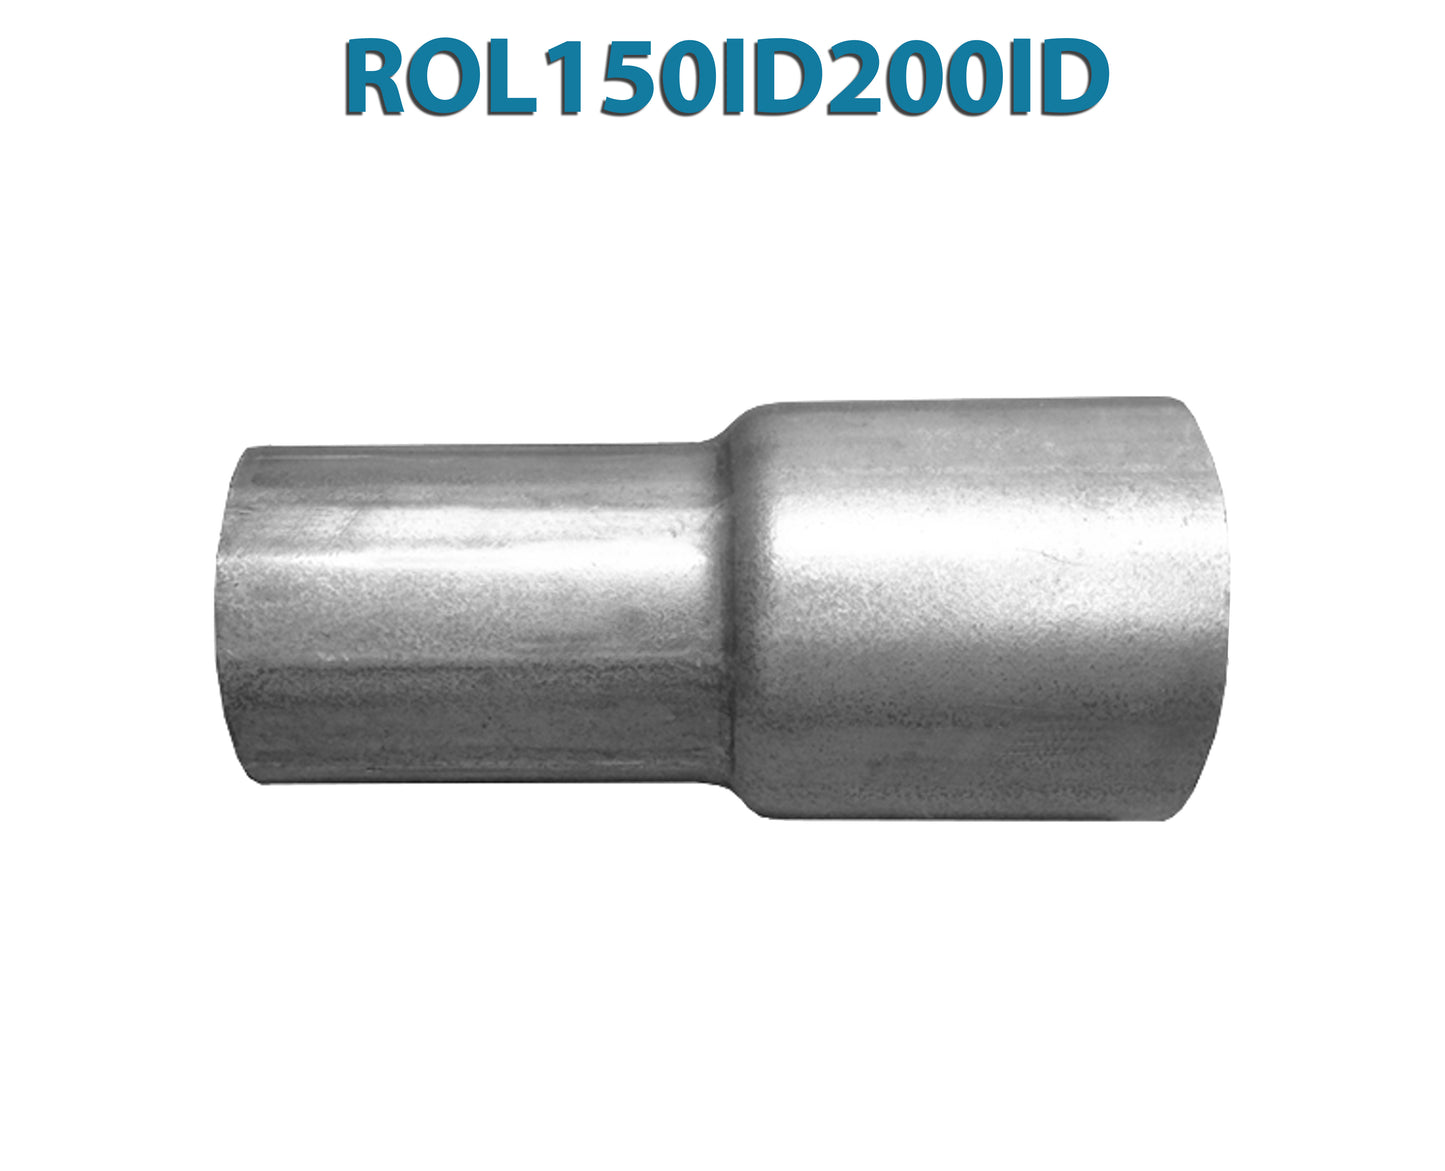 ROL150ID200ID 548506 1 1/2” ID to 2” ID Universal Exhaust Pipe to Pipe Adapter Reducer